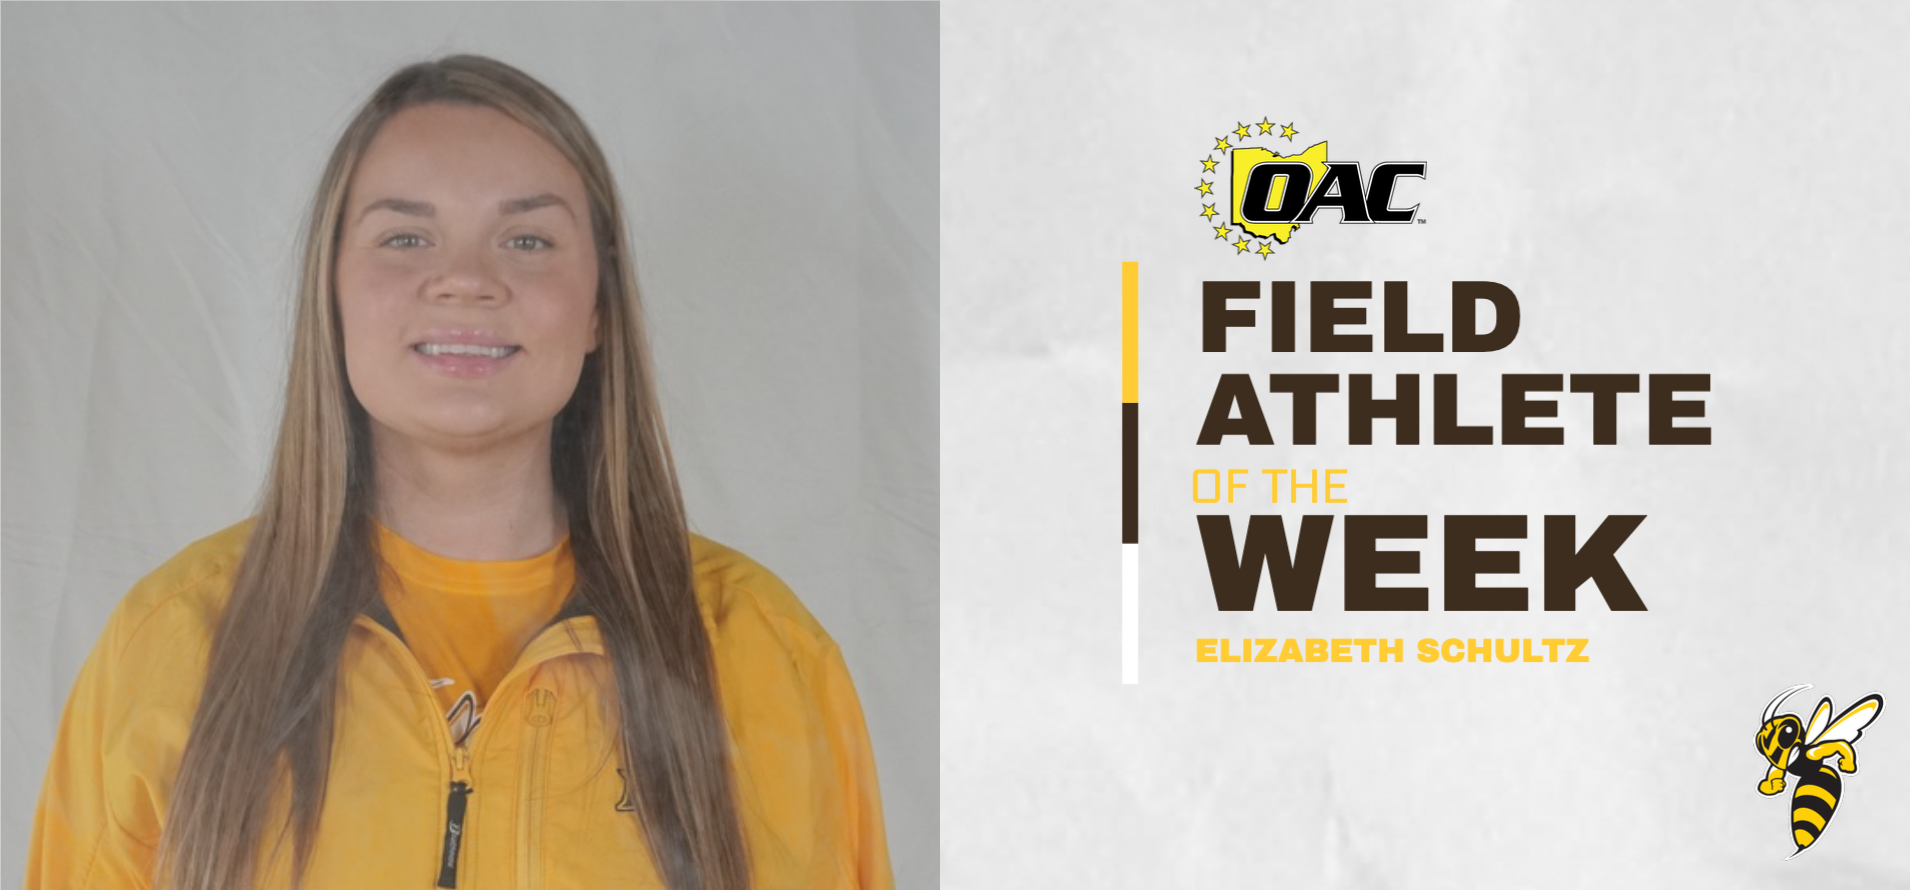 Schultz Earns First Weekly OAC Field Athlete of the Week Honor